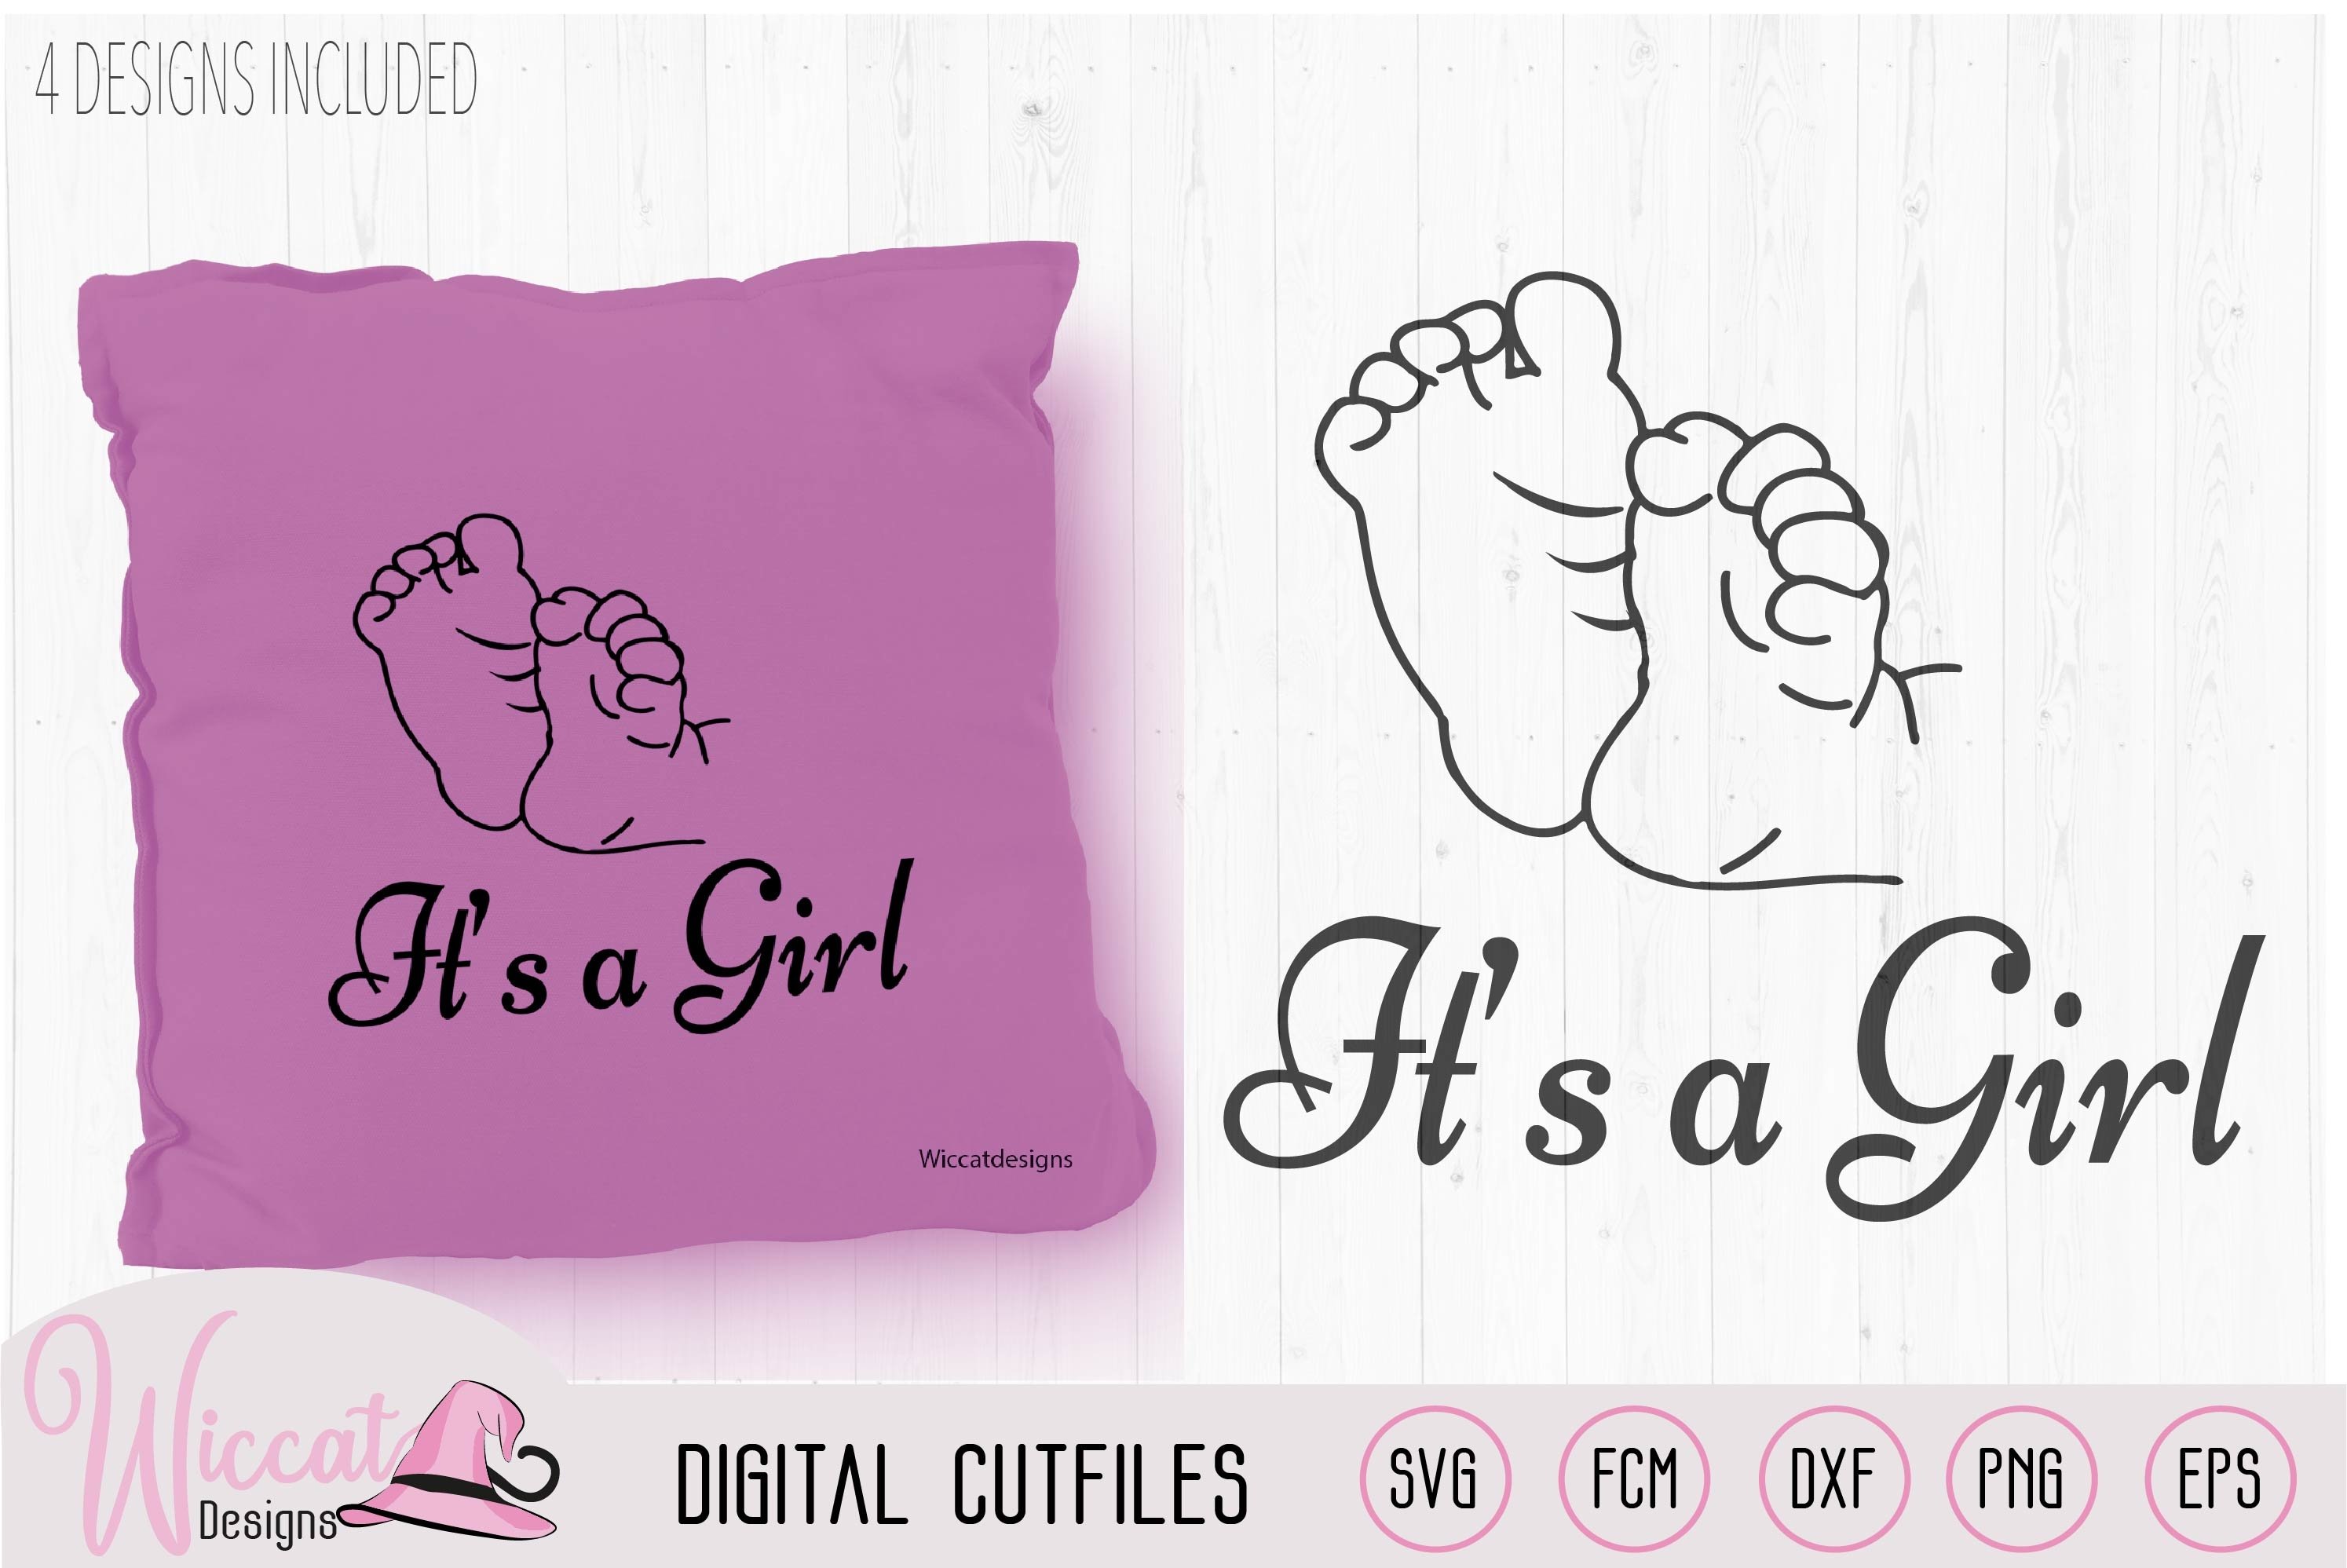 A print on a pink pillow with babies' feet.